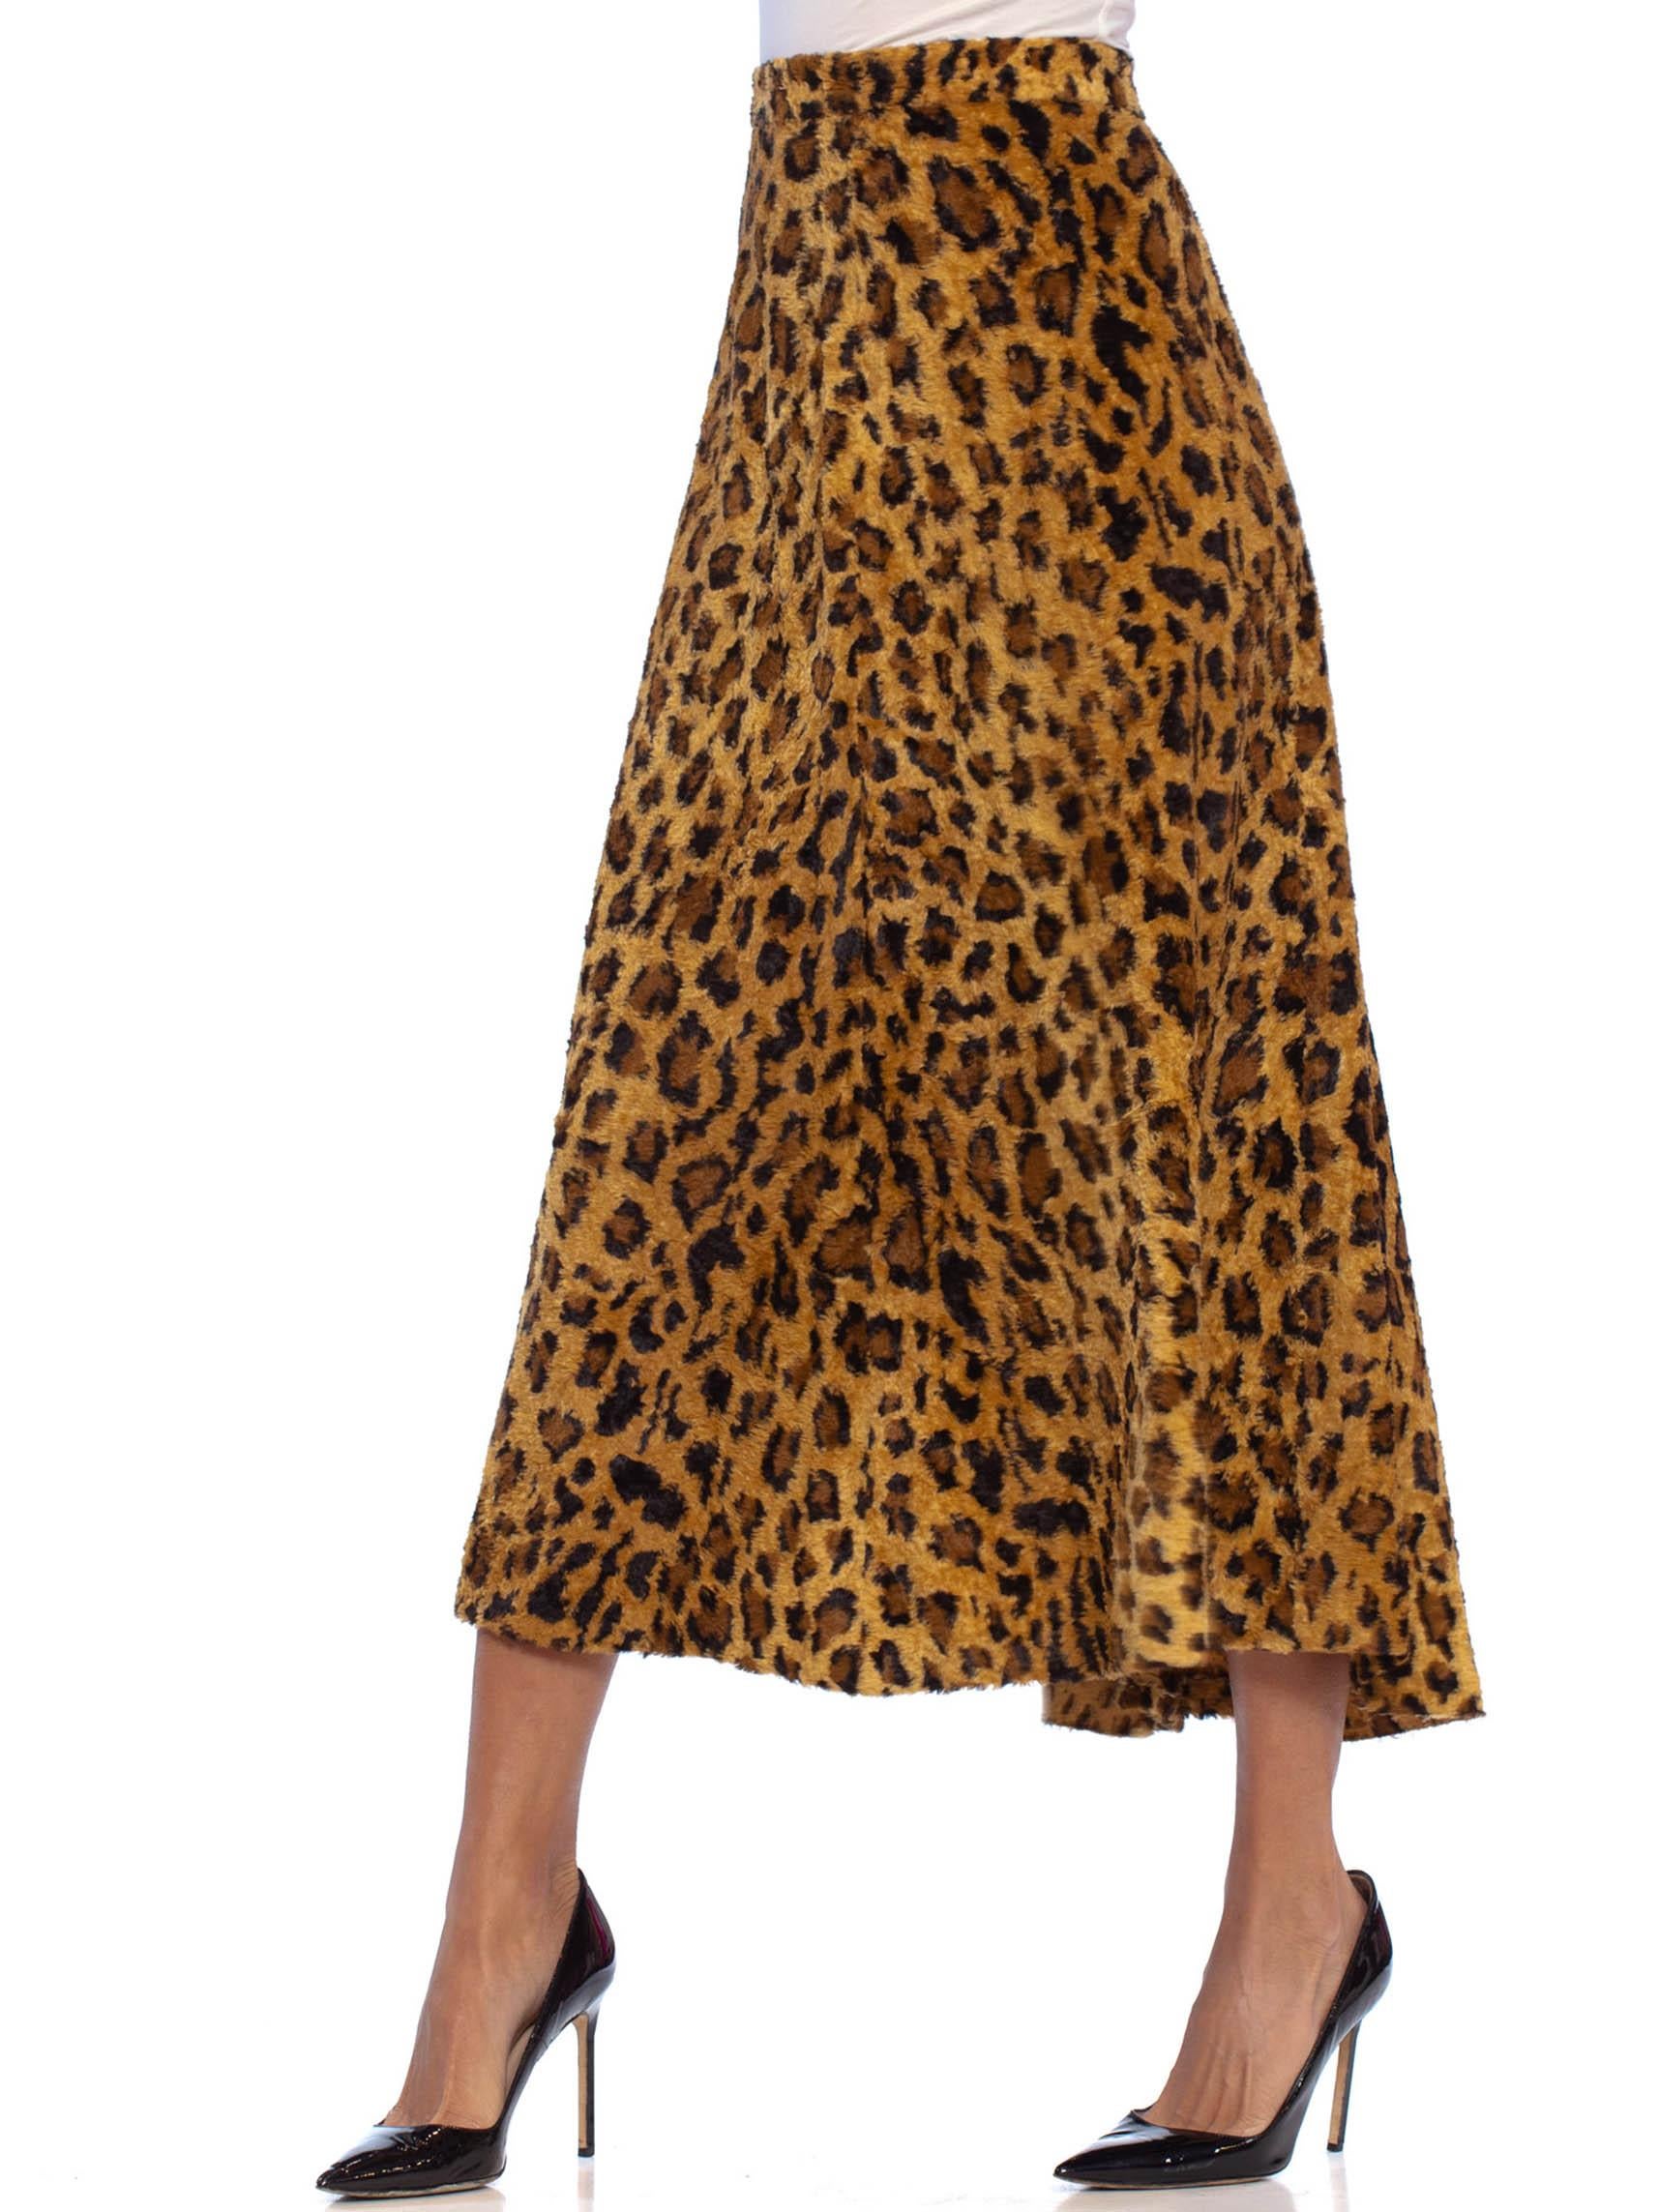 Brown 1940S Leopard Print Cotton & Rayon Faux Fur Early Rockabilly Skirt